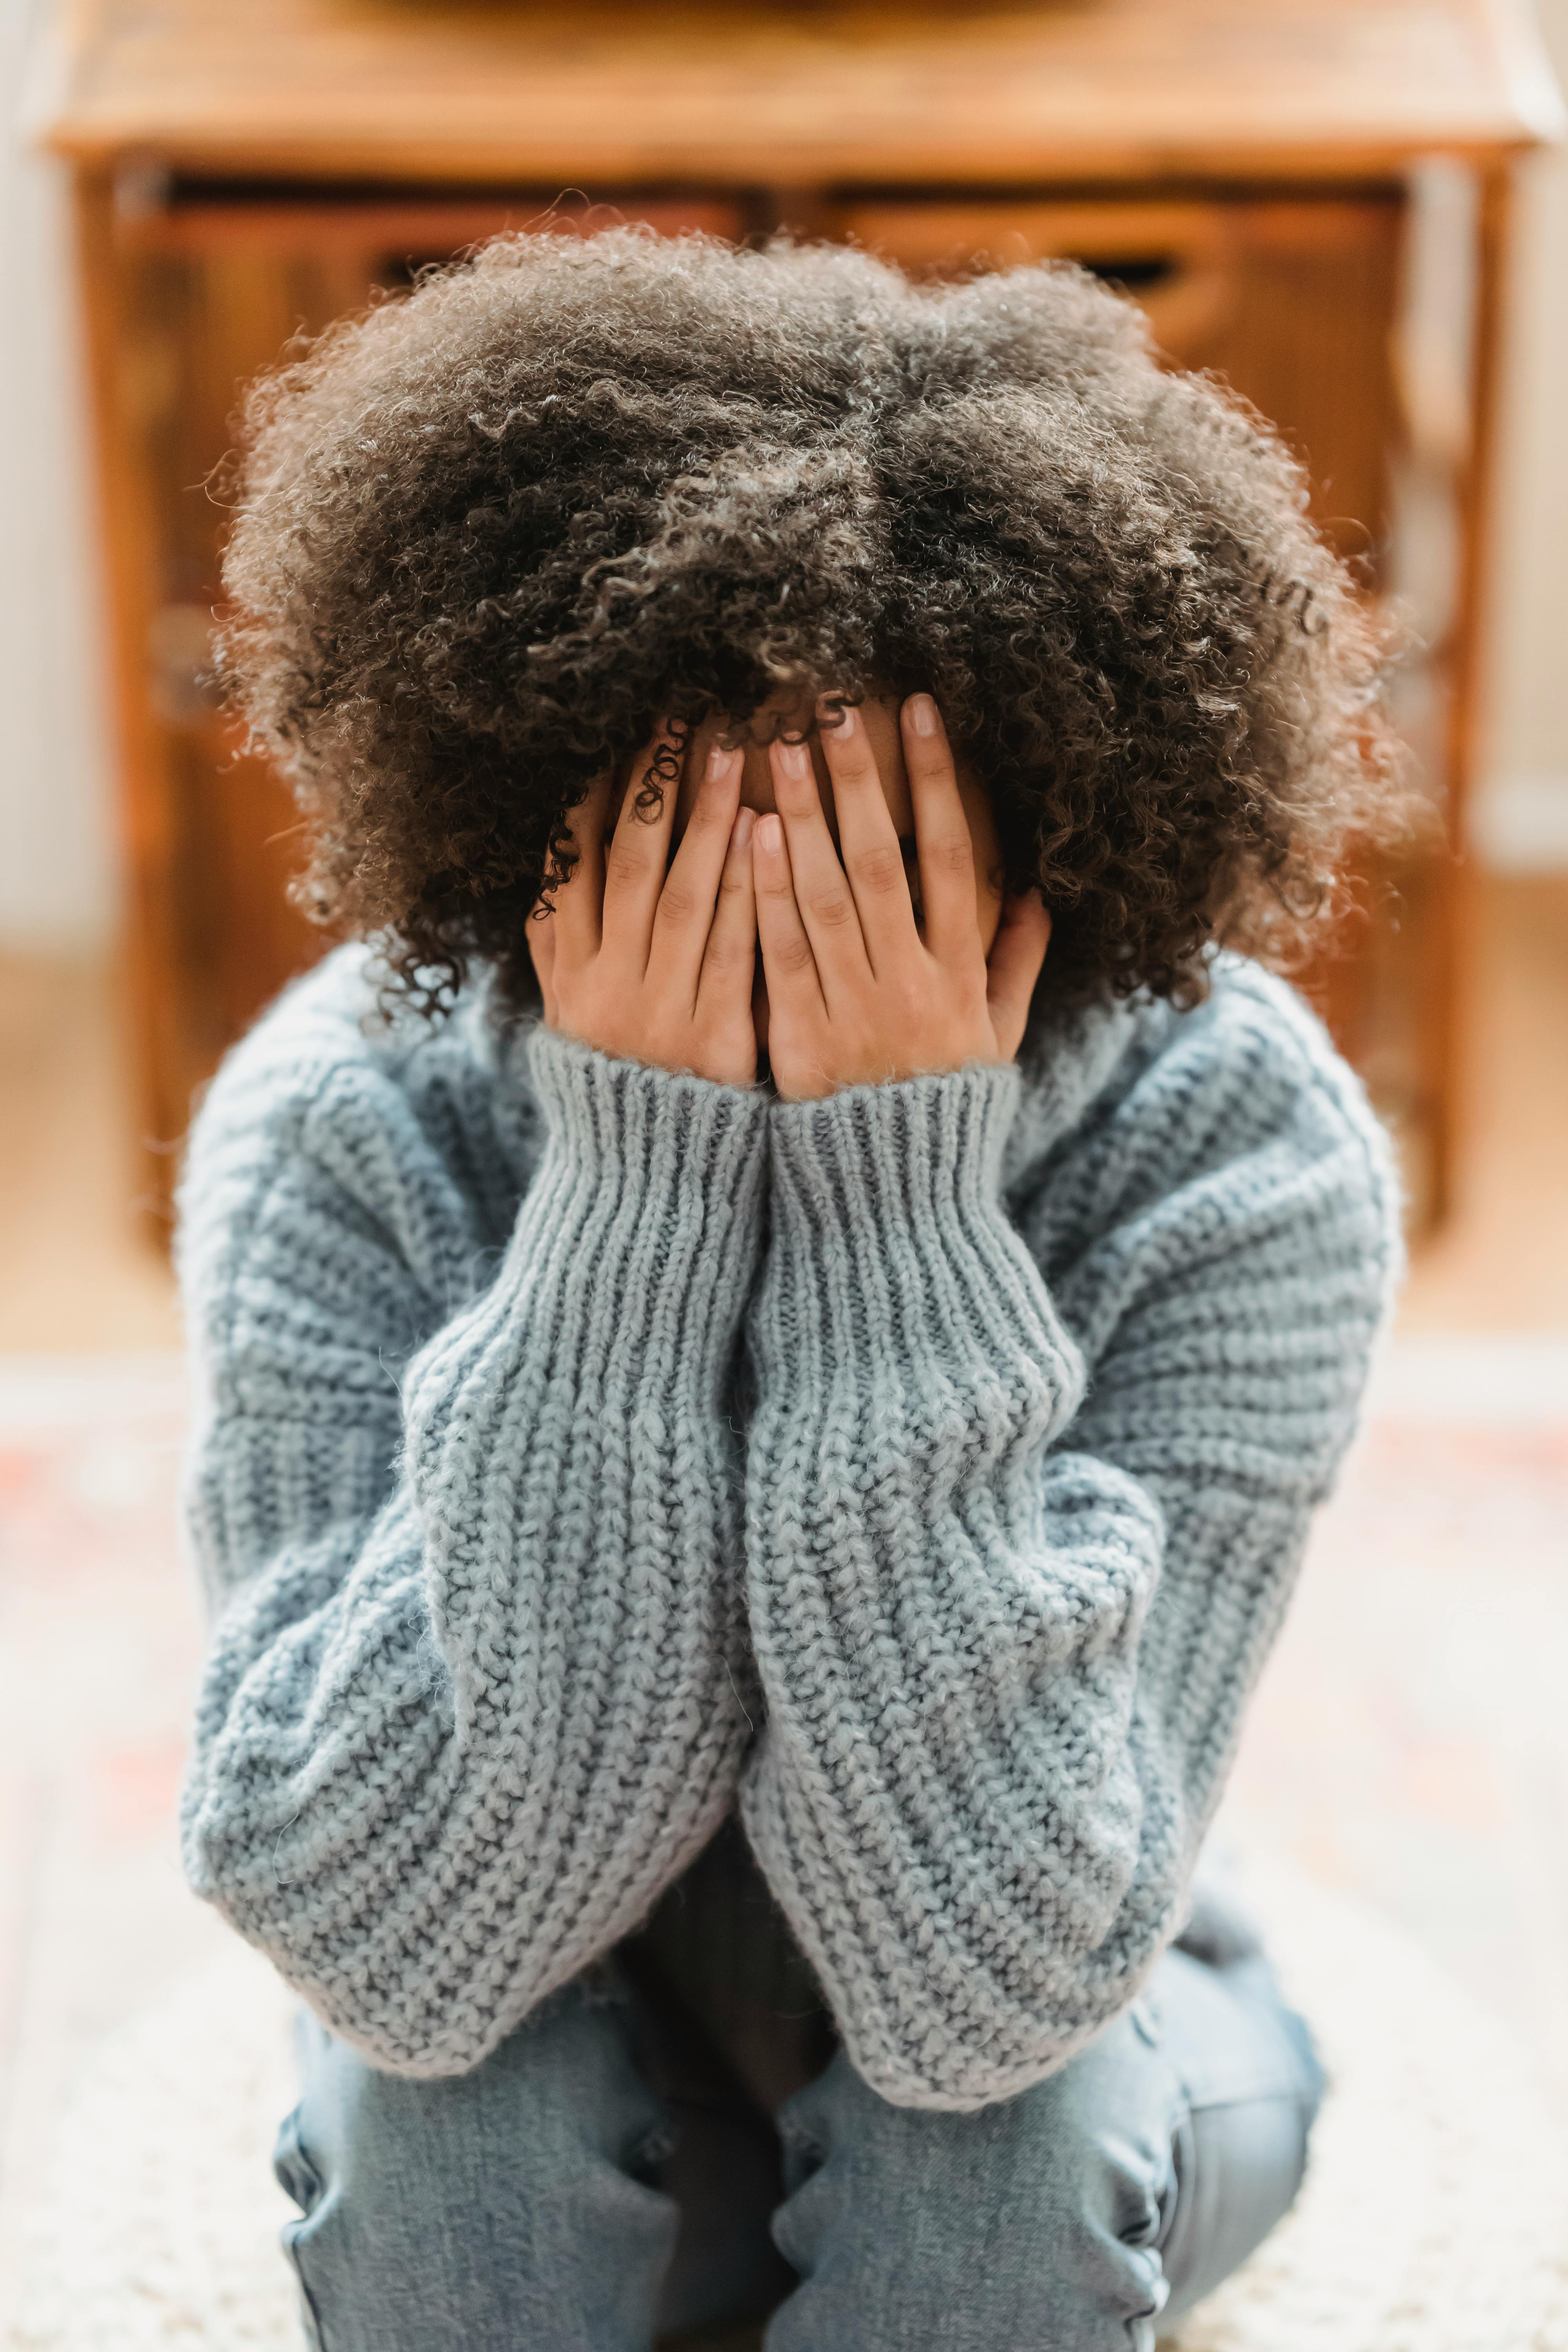 An upset woman covering her face | Source: Pexels